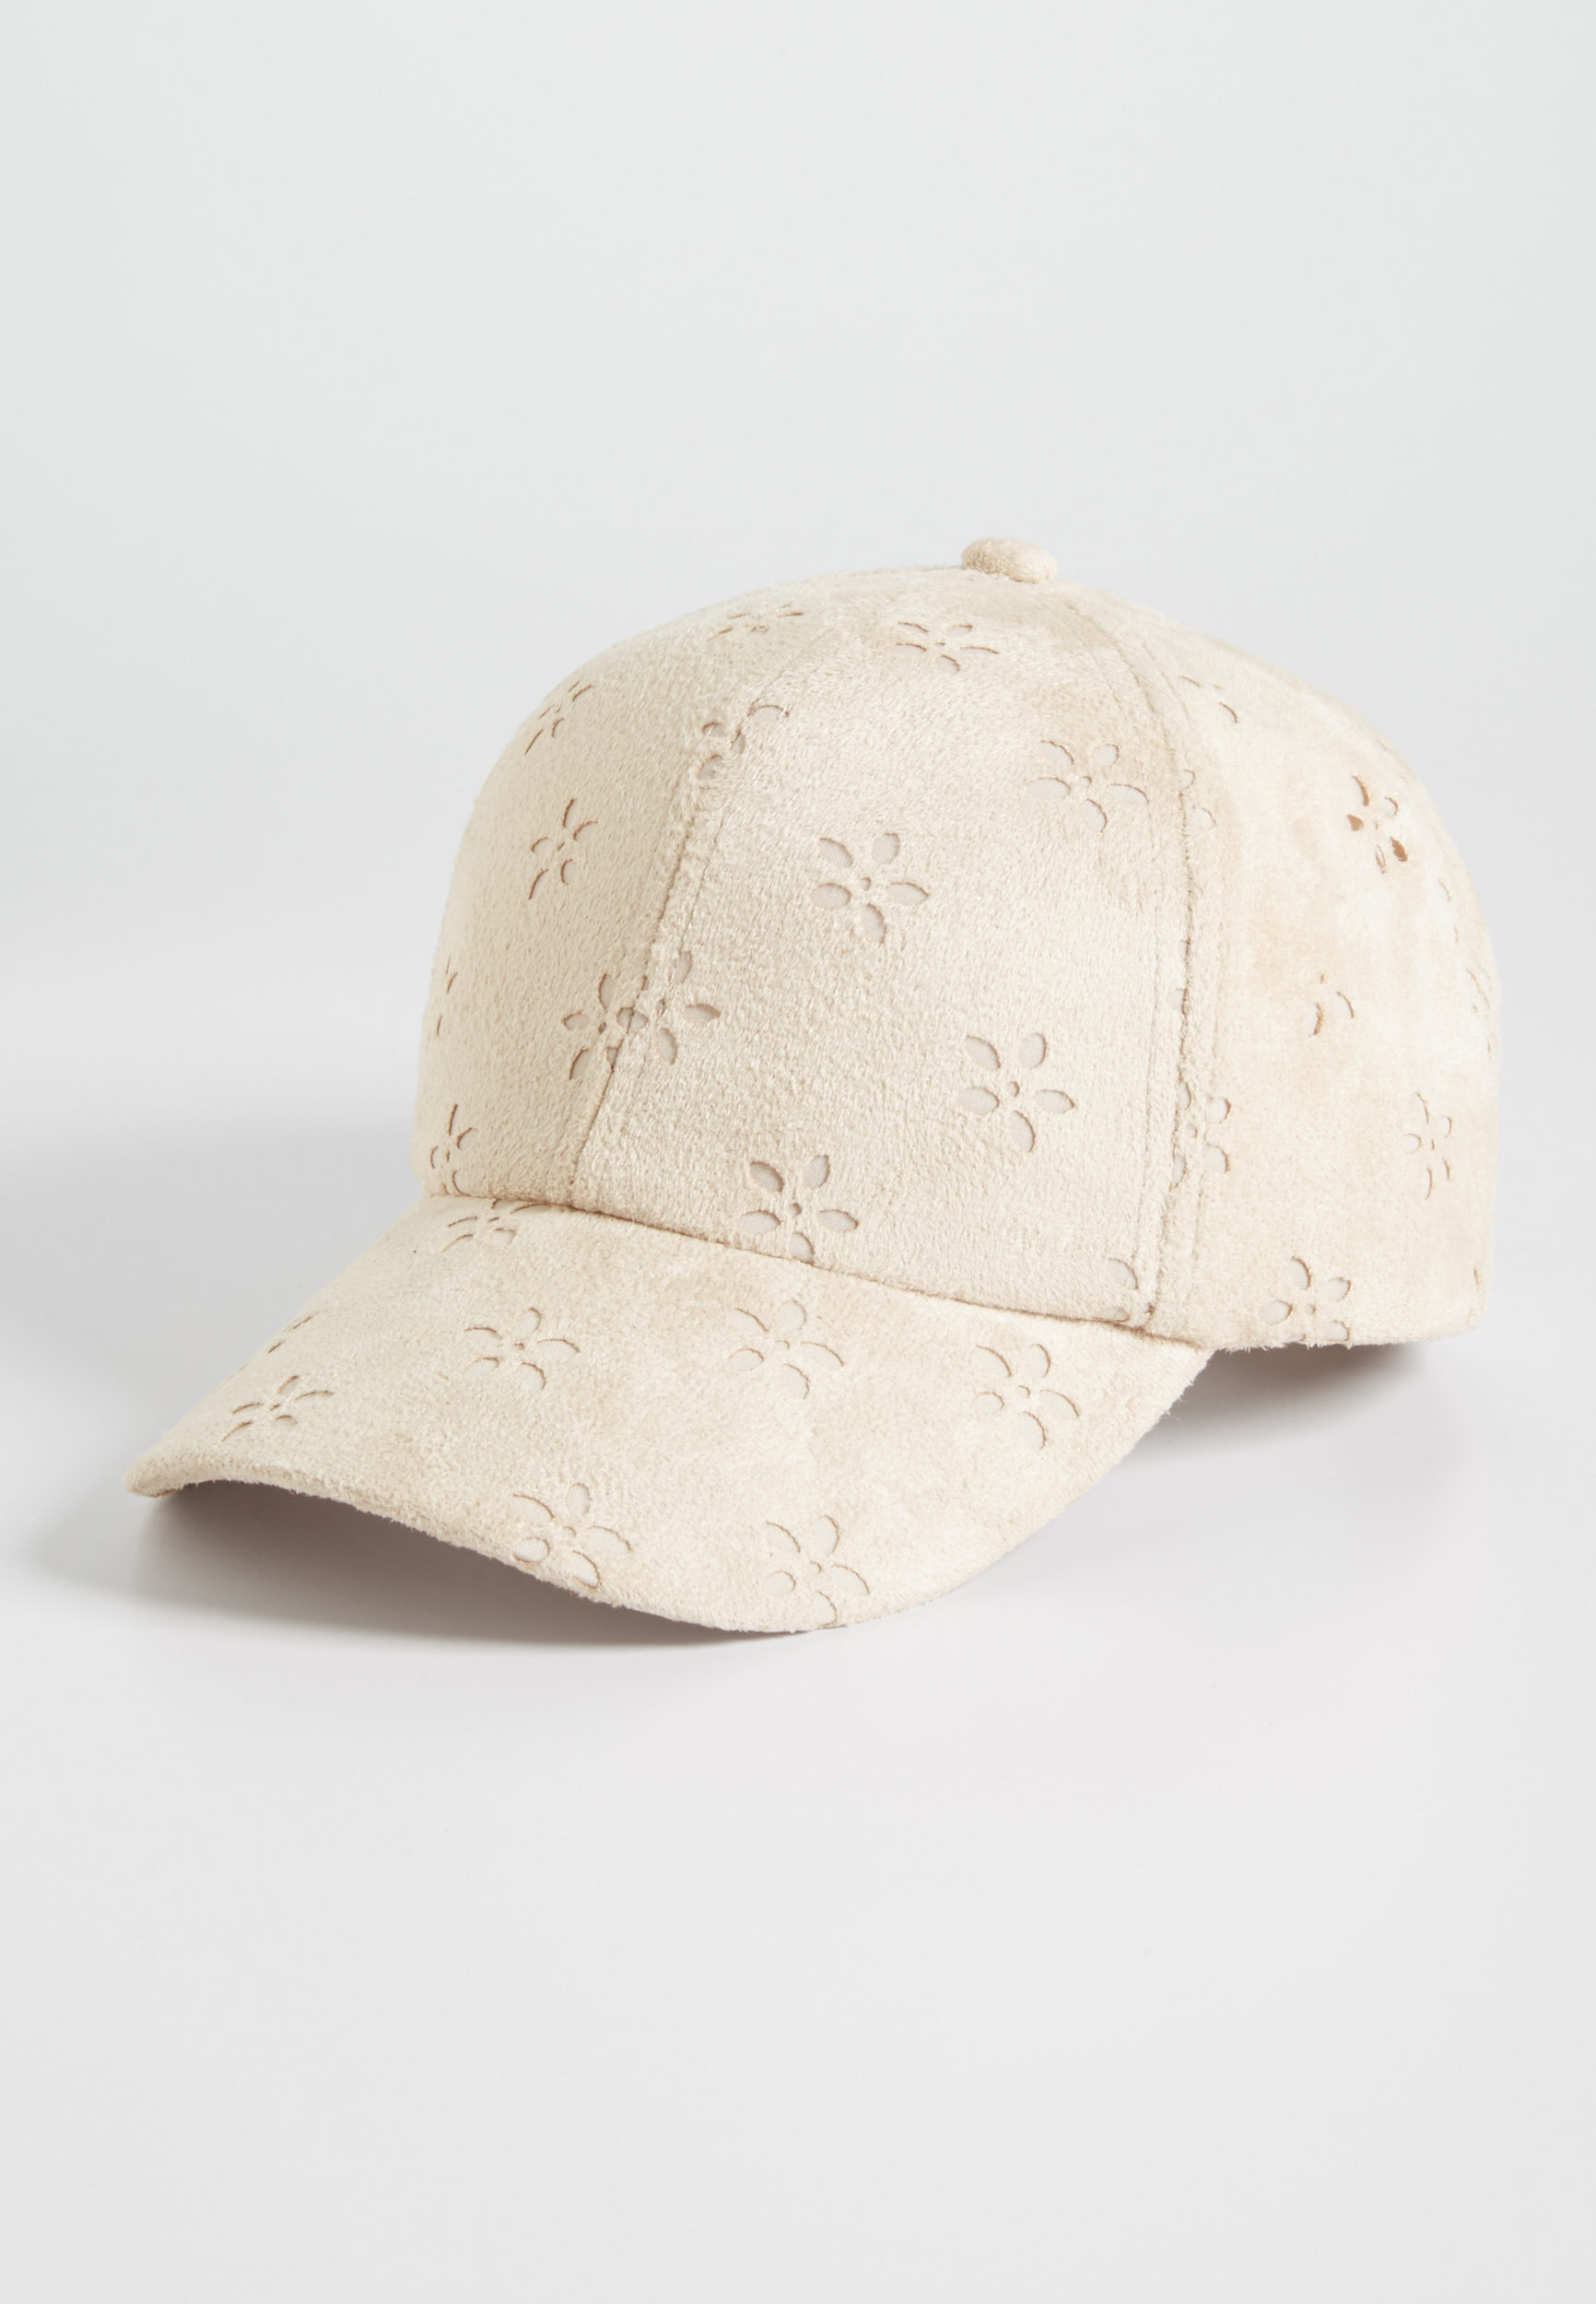 faux suede baseball hat with laser cut floral design | maurices